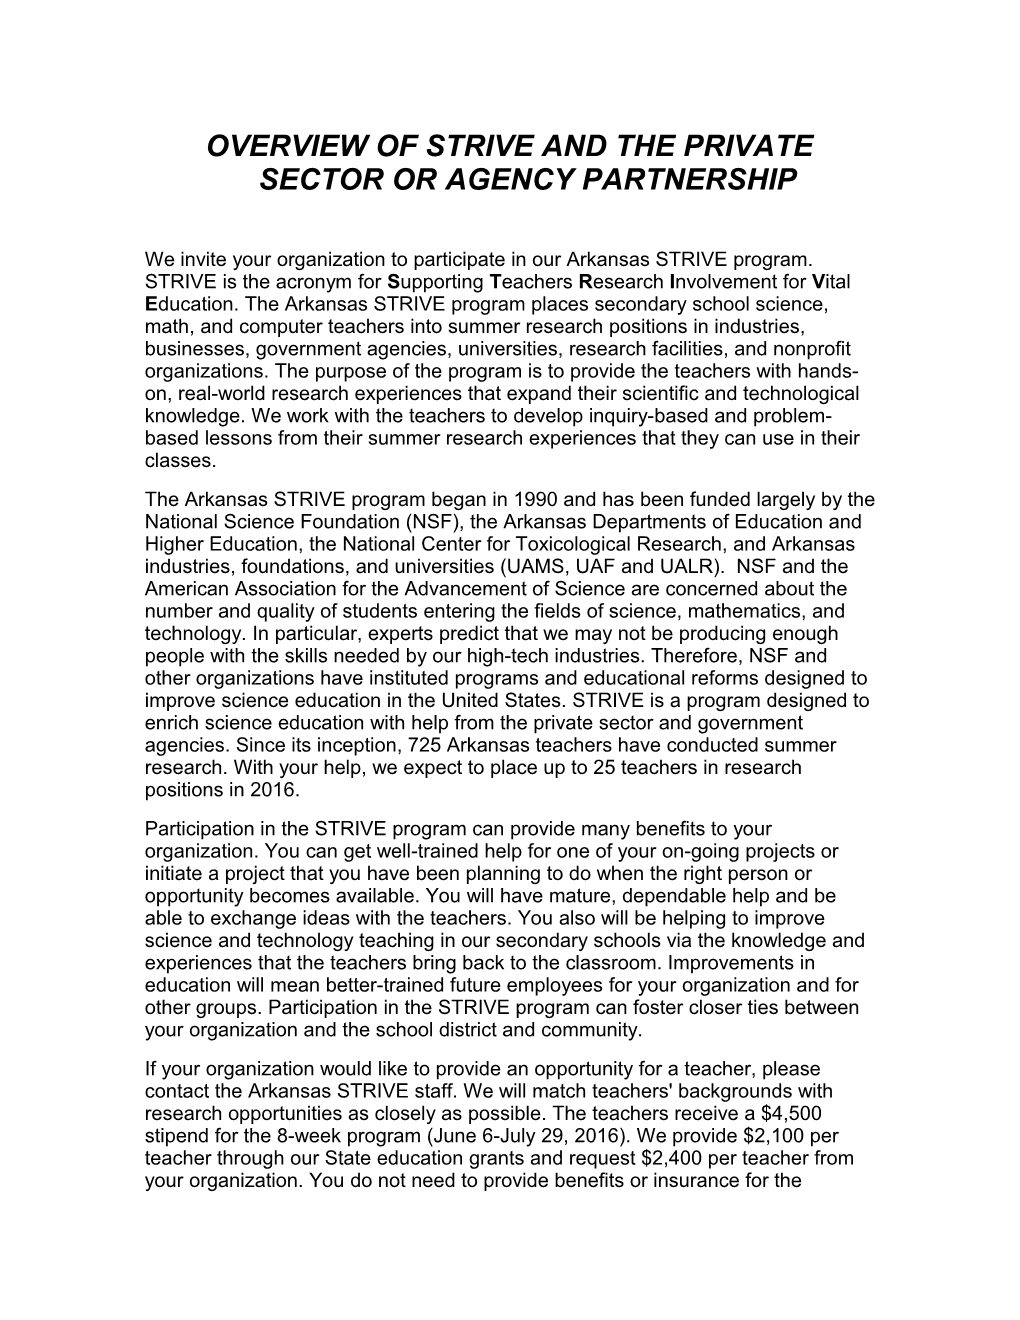 Overview of Strive and the Private Sector Or Agency Partnership